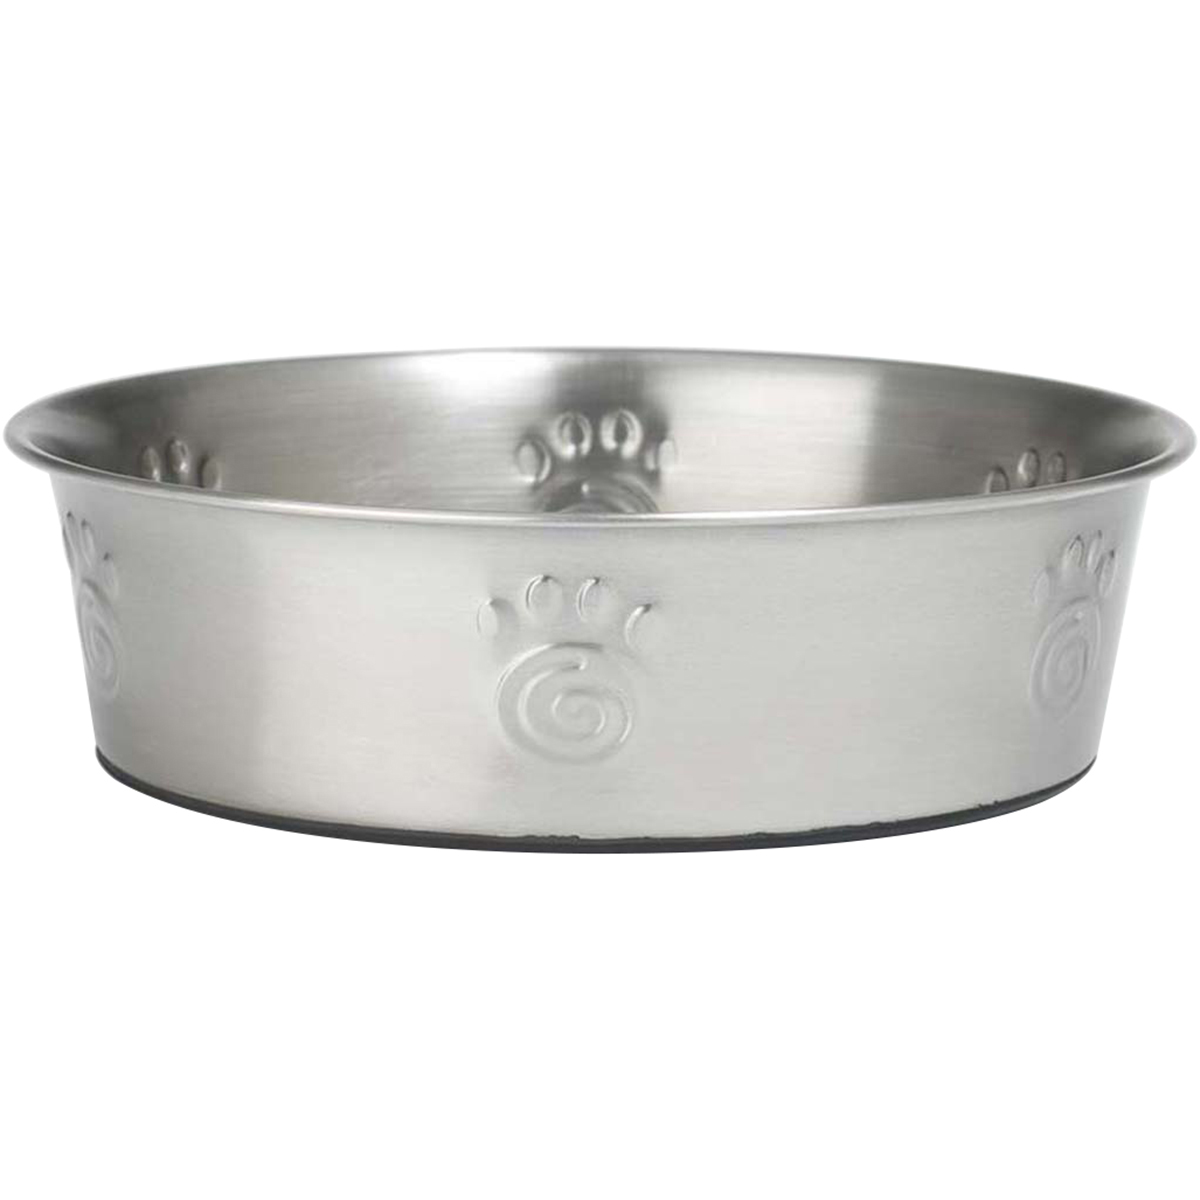 60050 Cayman Stainless Steel Bowl